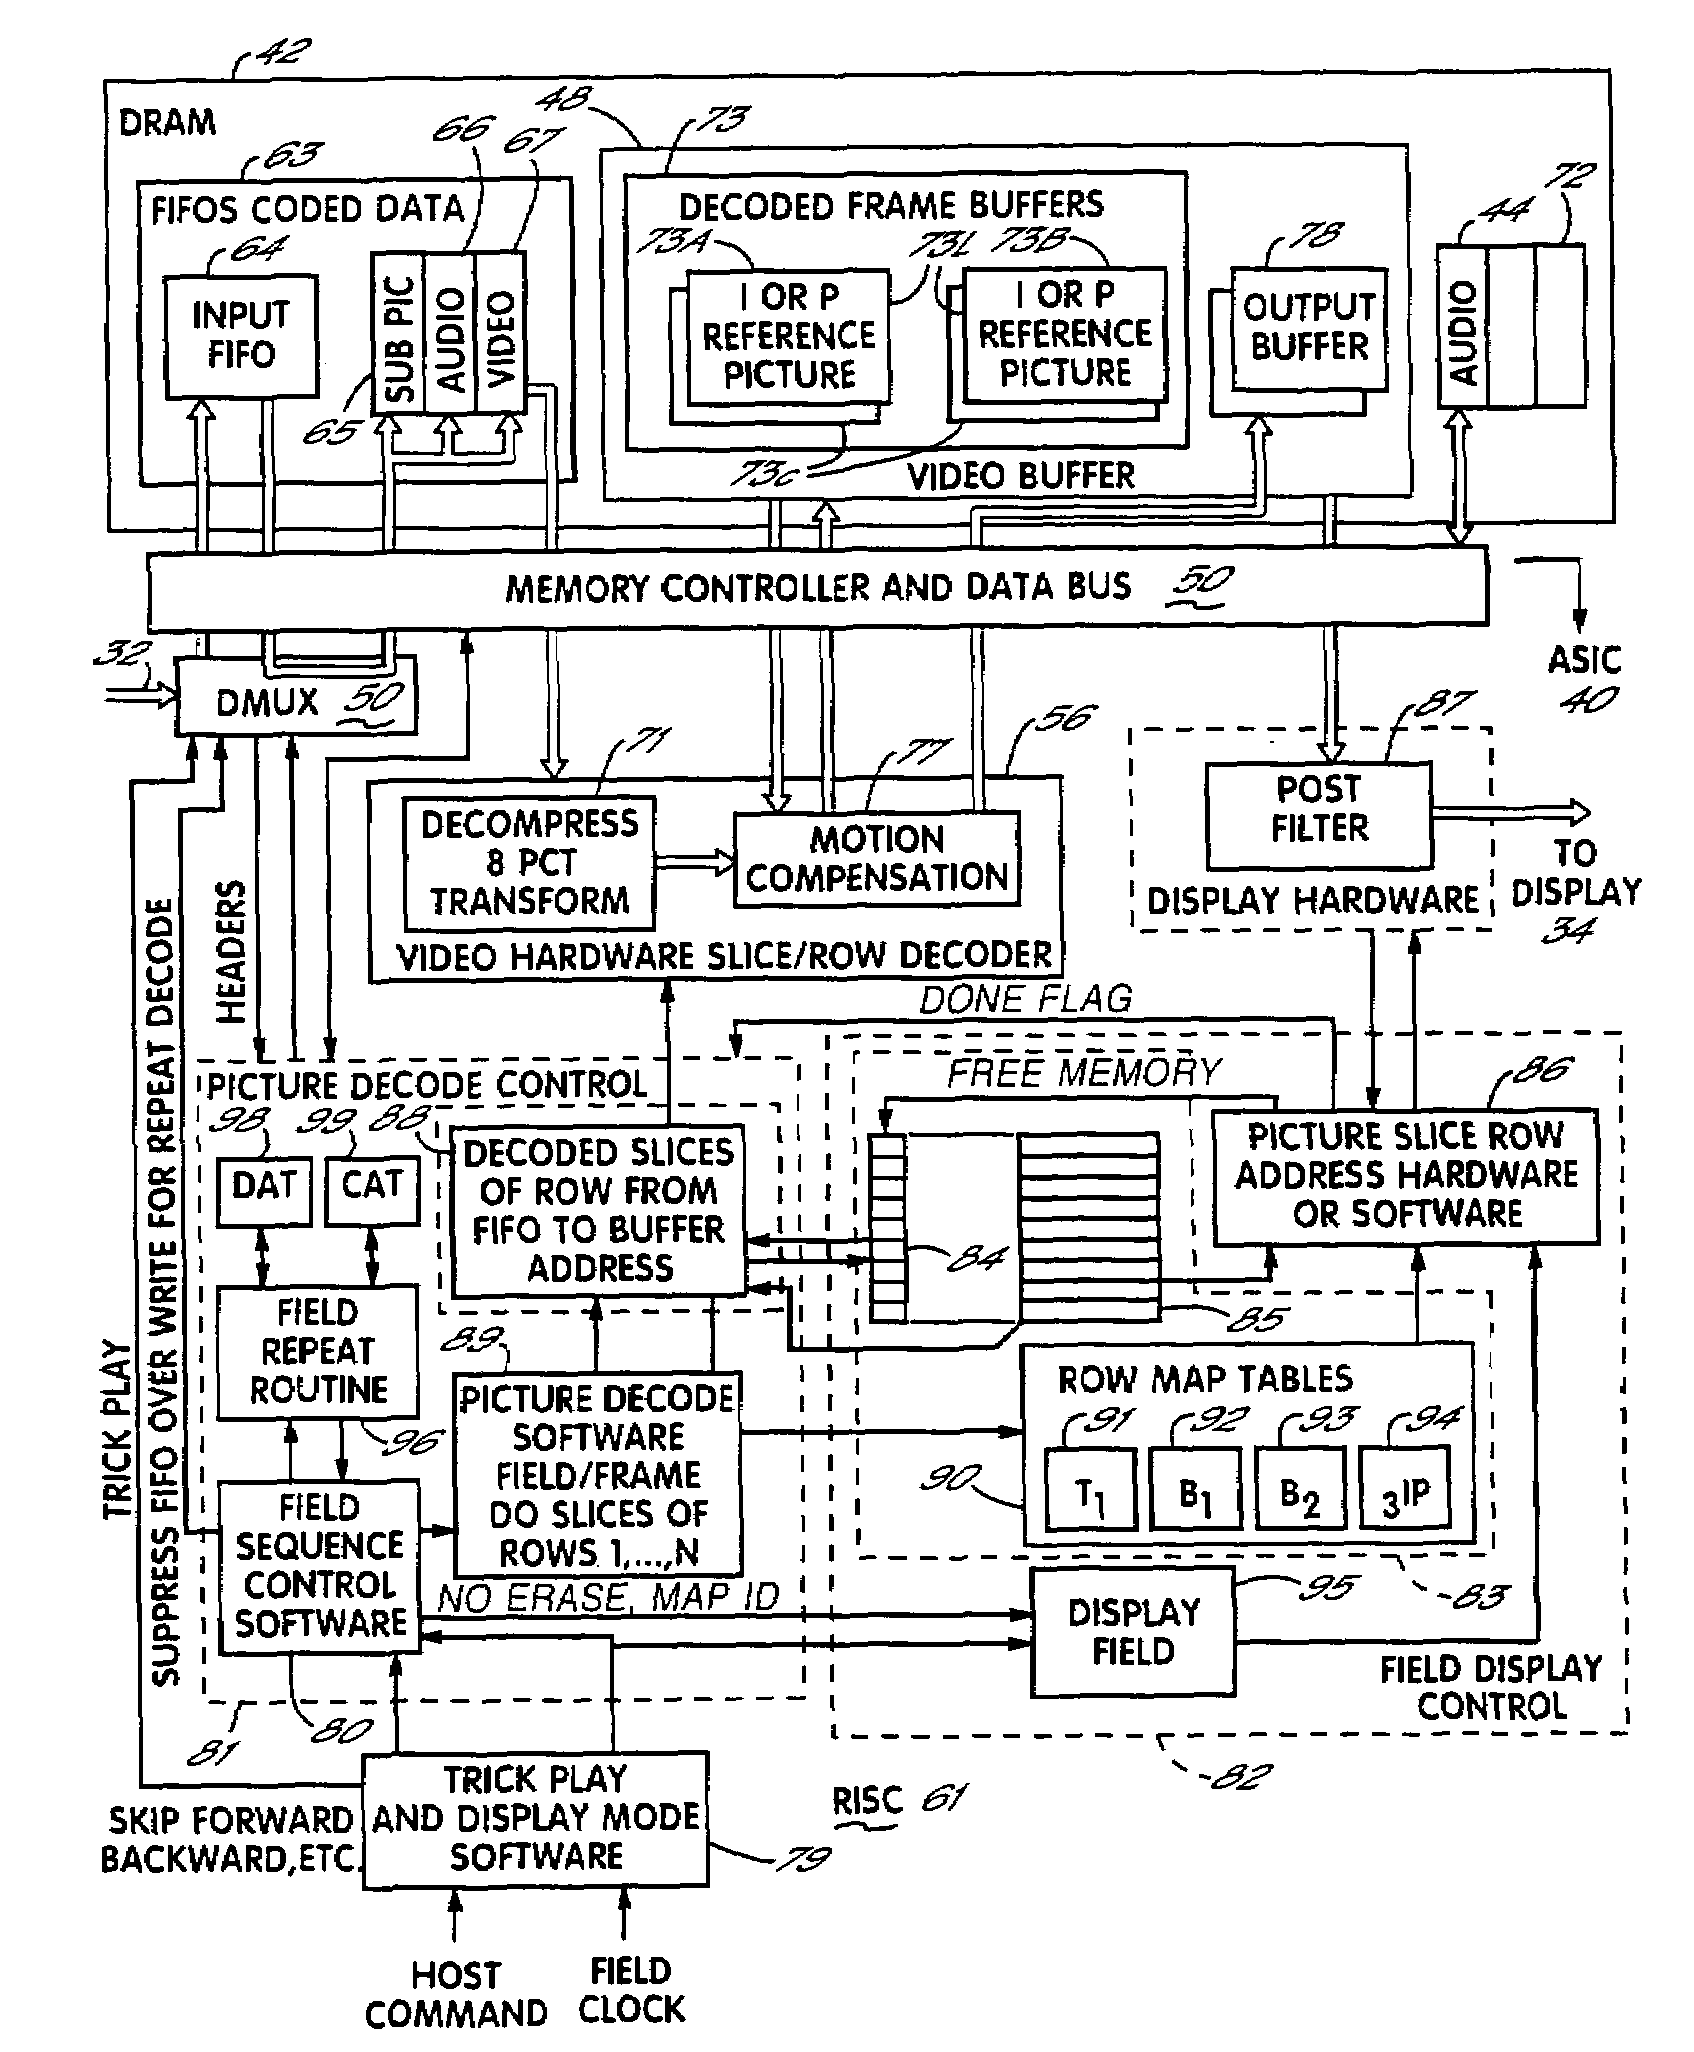 Digital video decoding, buffering and frame-rate converting method and apparatus